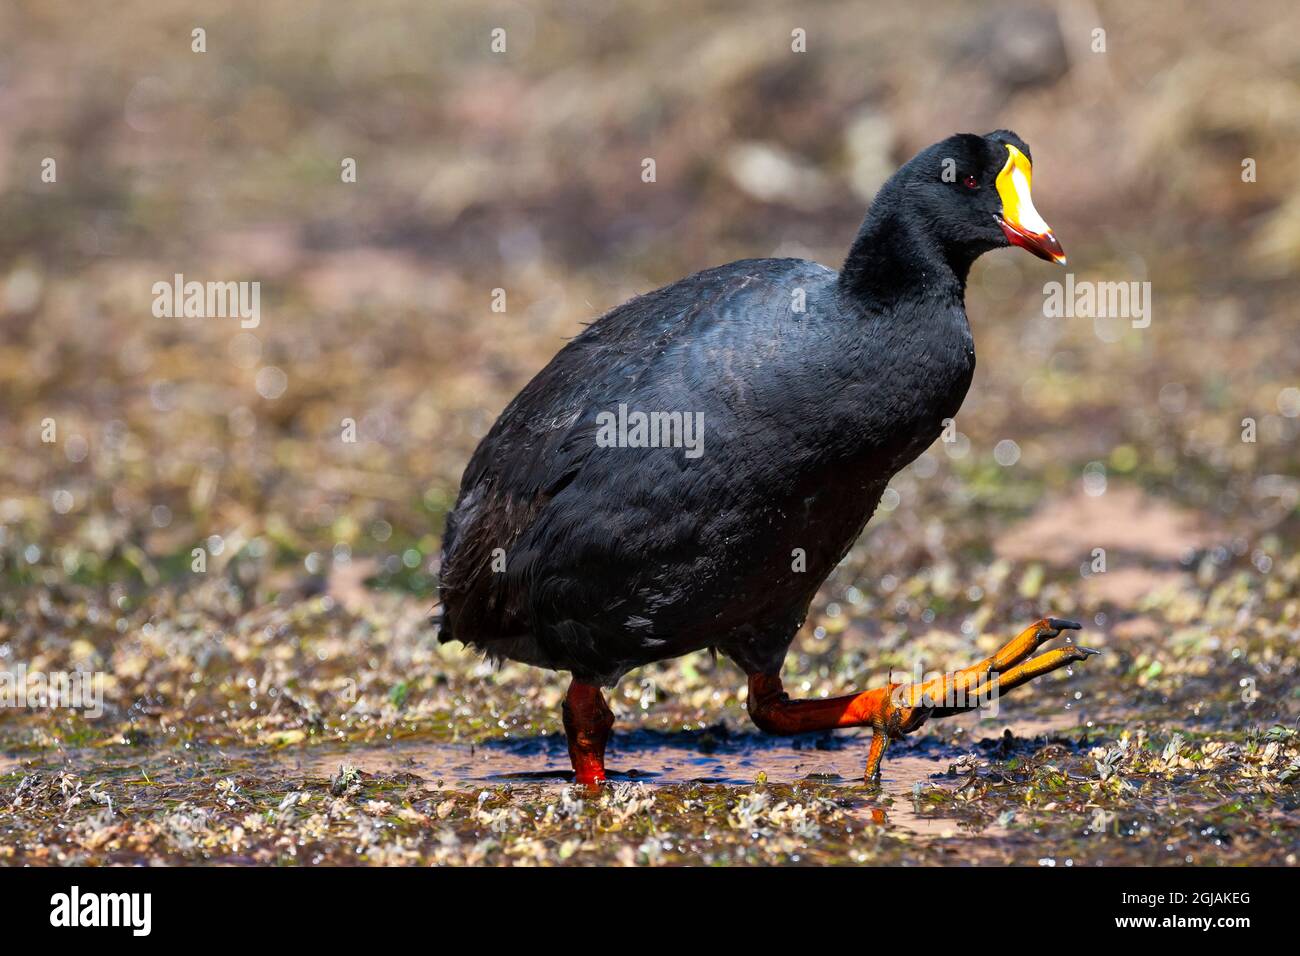 Chile, Machuca, giant coot, Fulica gigantea. Portrait of a giant coot showing its enormous red and orange feet. Stock Photo